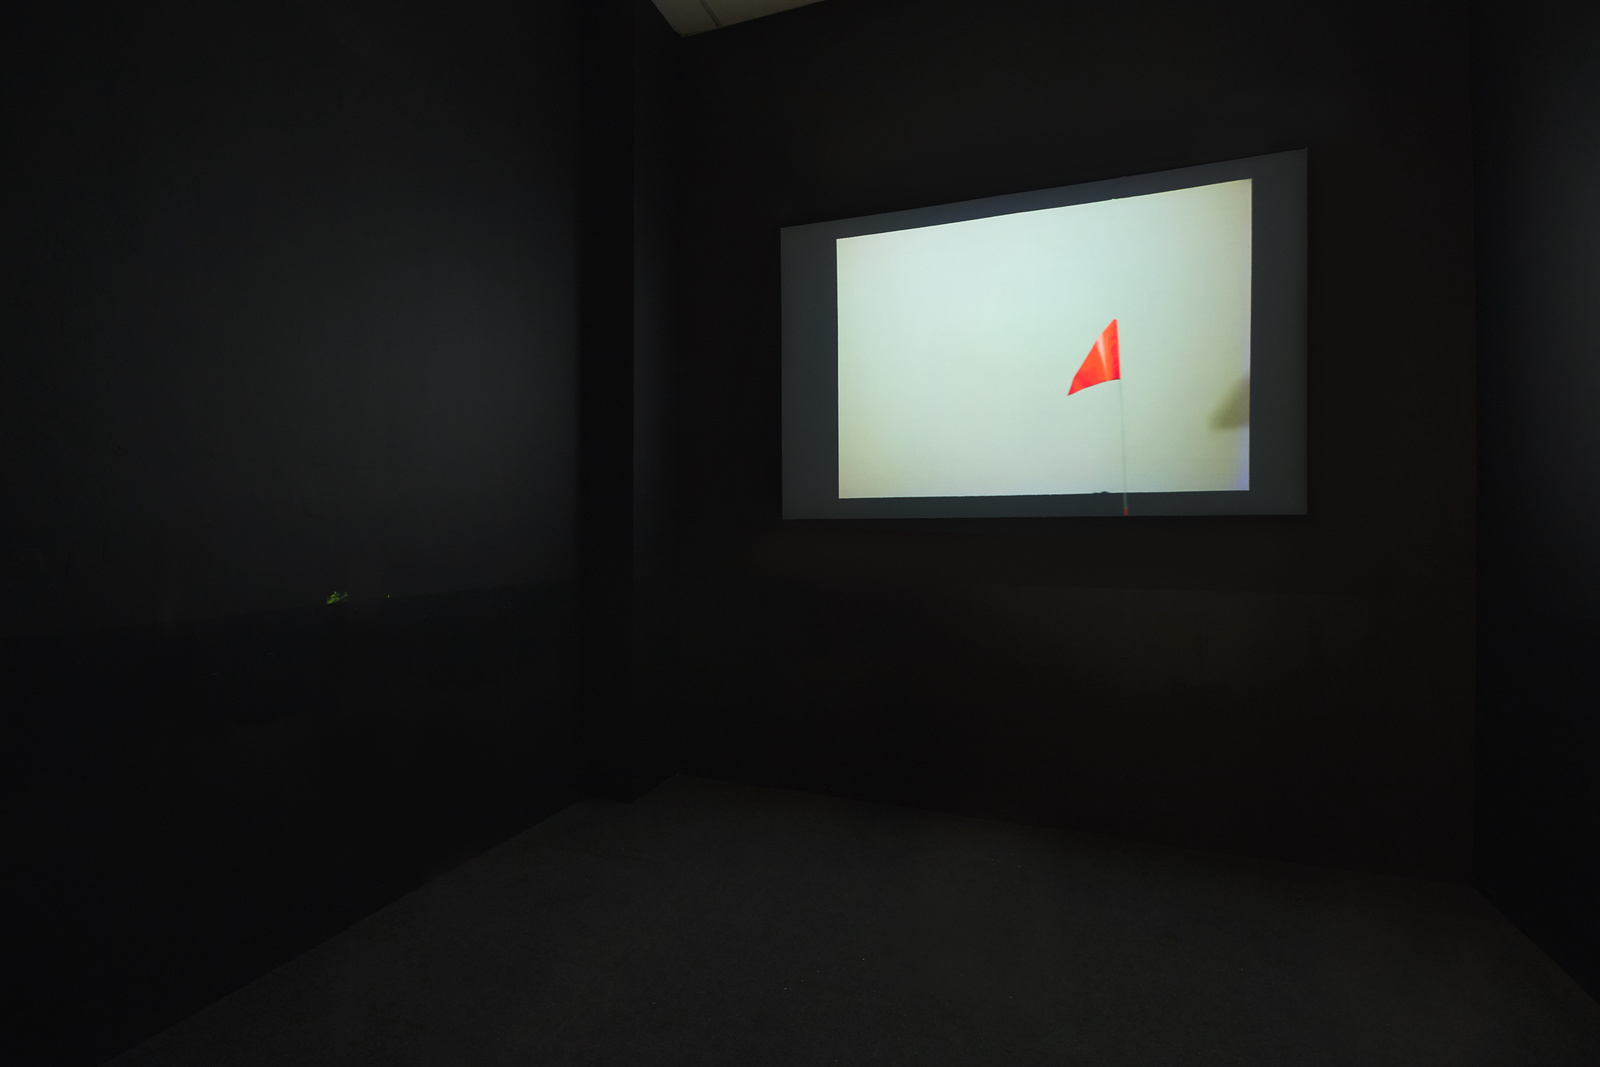 A small, dark room painted black, with a projected video on the back wall.
        Video shows a white rectangle with a neon orange pennant flag on a pole in front of it.